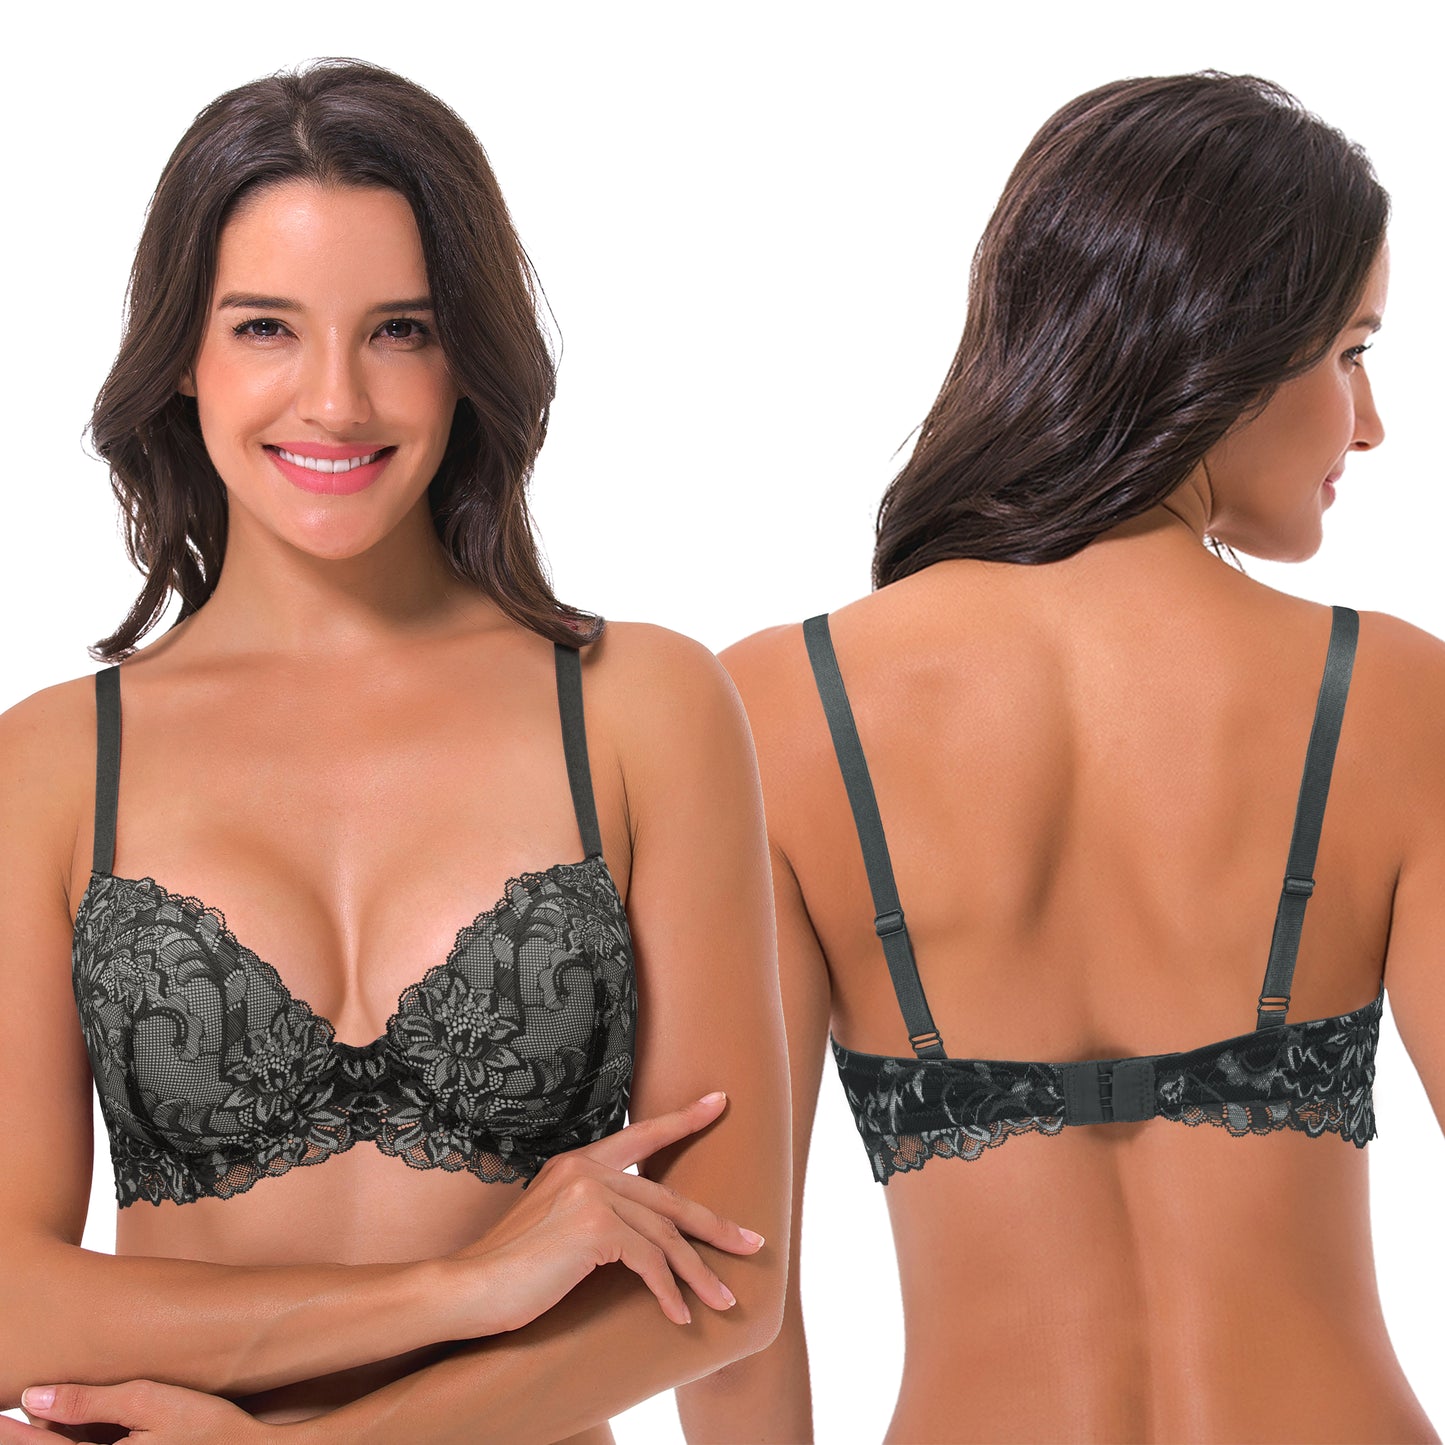 Women's Underwire Plus Size Push Up Add 1 and a Half Cup Lace Bras-2PK-White/Red,Black/Grey